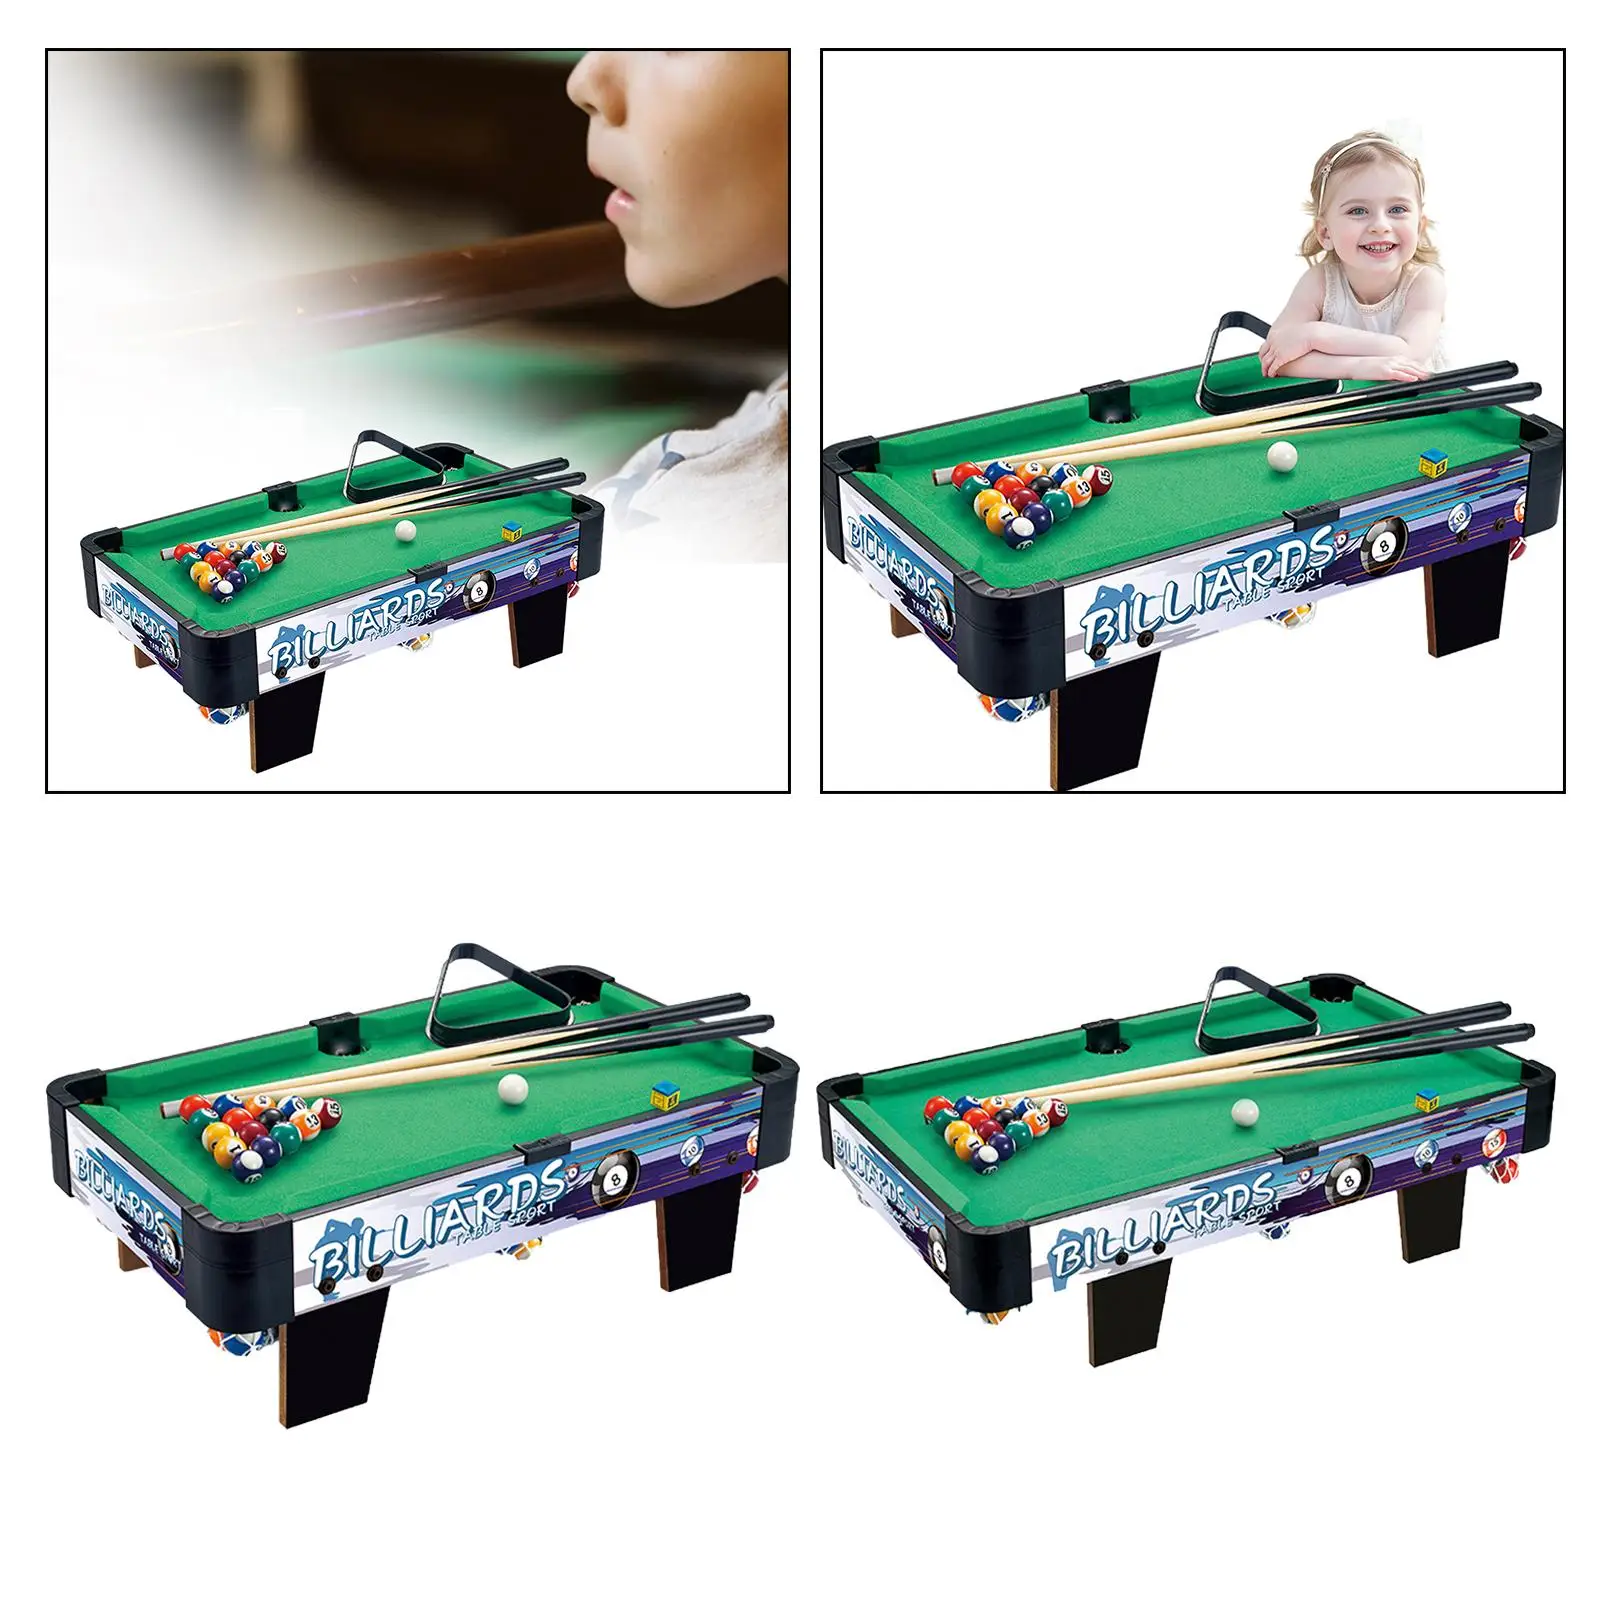 Billiard Pool Set Desktop Snooker 15 Colorful Balls, 1 Cue Ball Leisure Game Toy Small Tabletop Billiards for Home Office Use